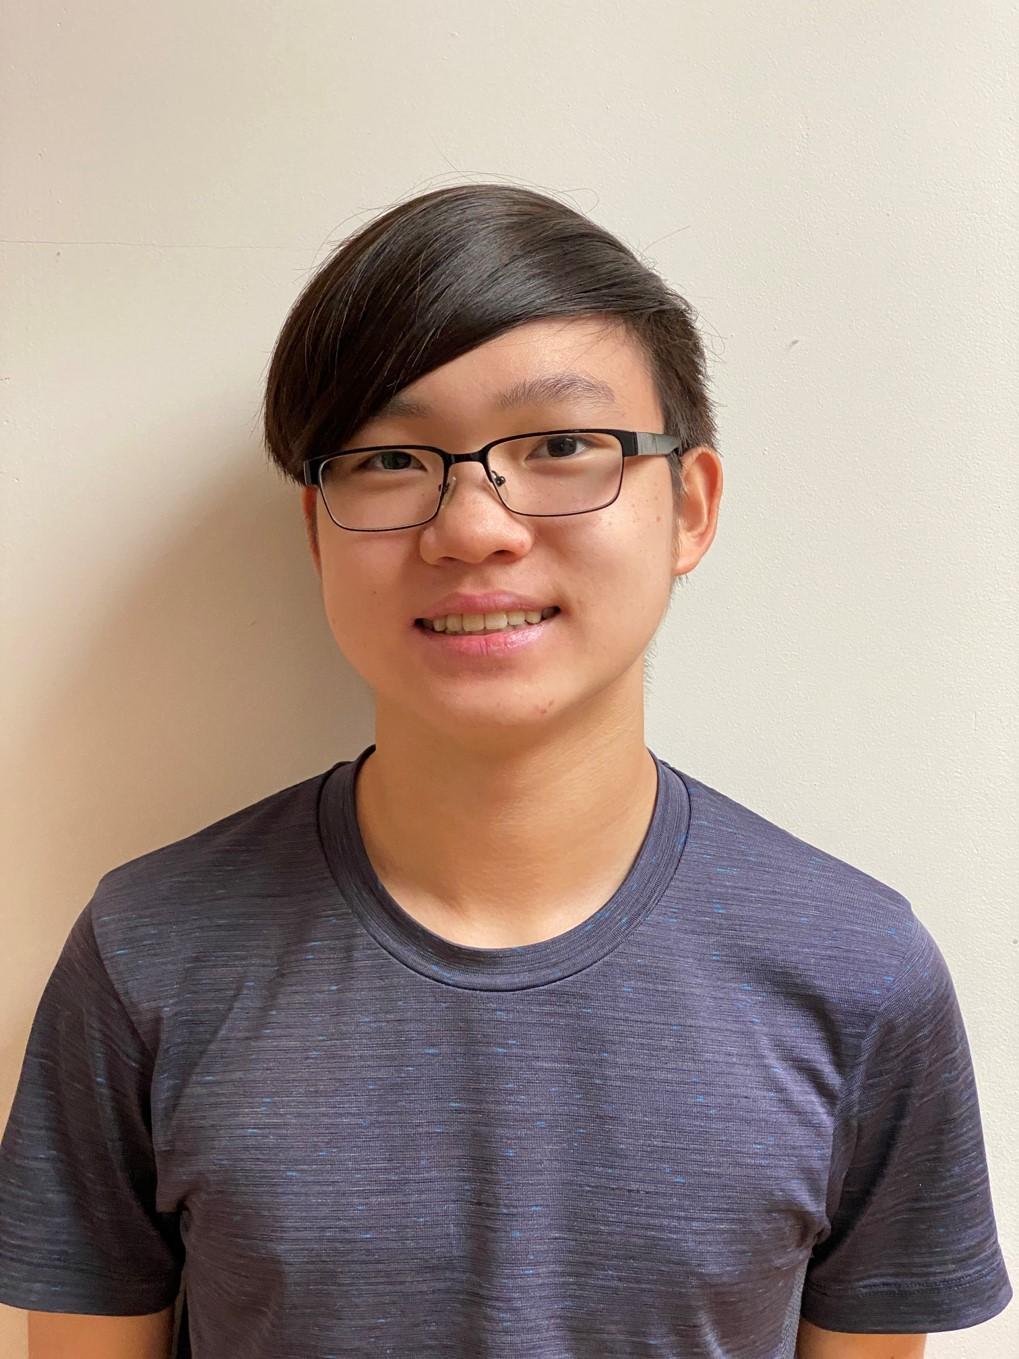 Small Things by Martingrove Collegiate Institute student Nathan Tsui took first place in the annual Flash Fiction Contest.